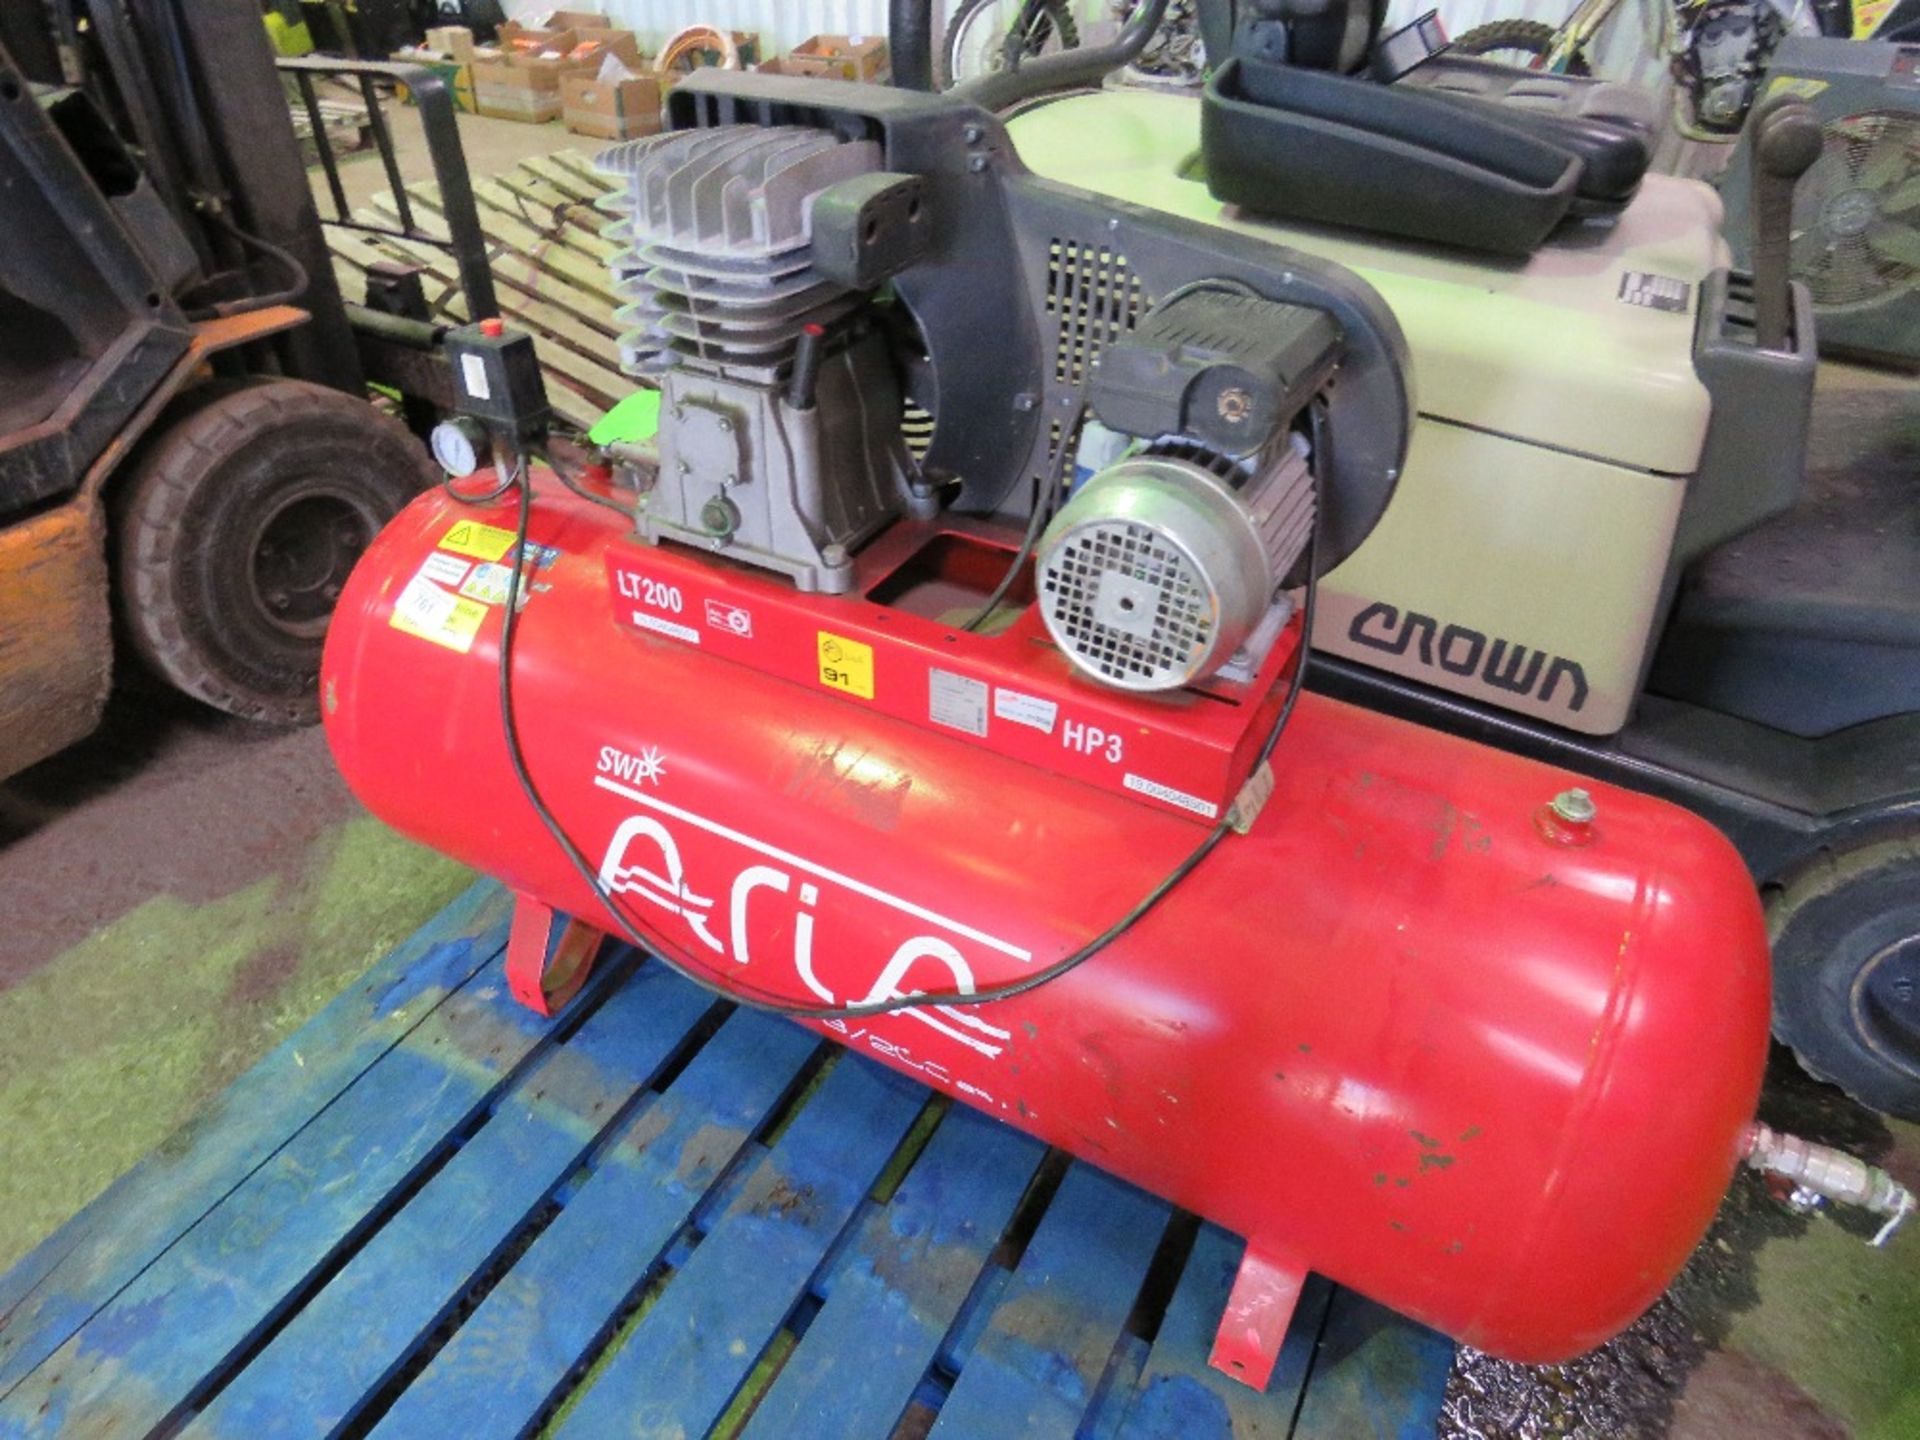 ARIA 240VOLT WORKSHOP COMPRESSOR. YEAR 2015. DIRECT FROM LOCAL COMPANY DUE TO DEPOT CLOSURE. - Image 2 of 2